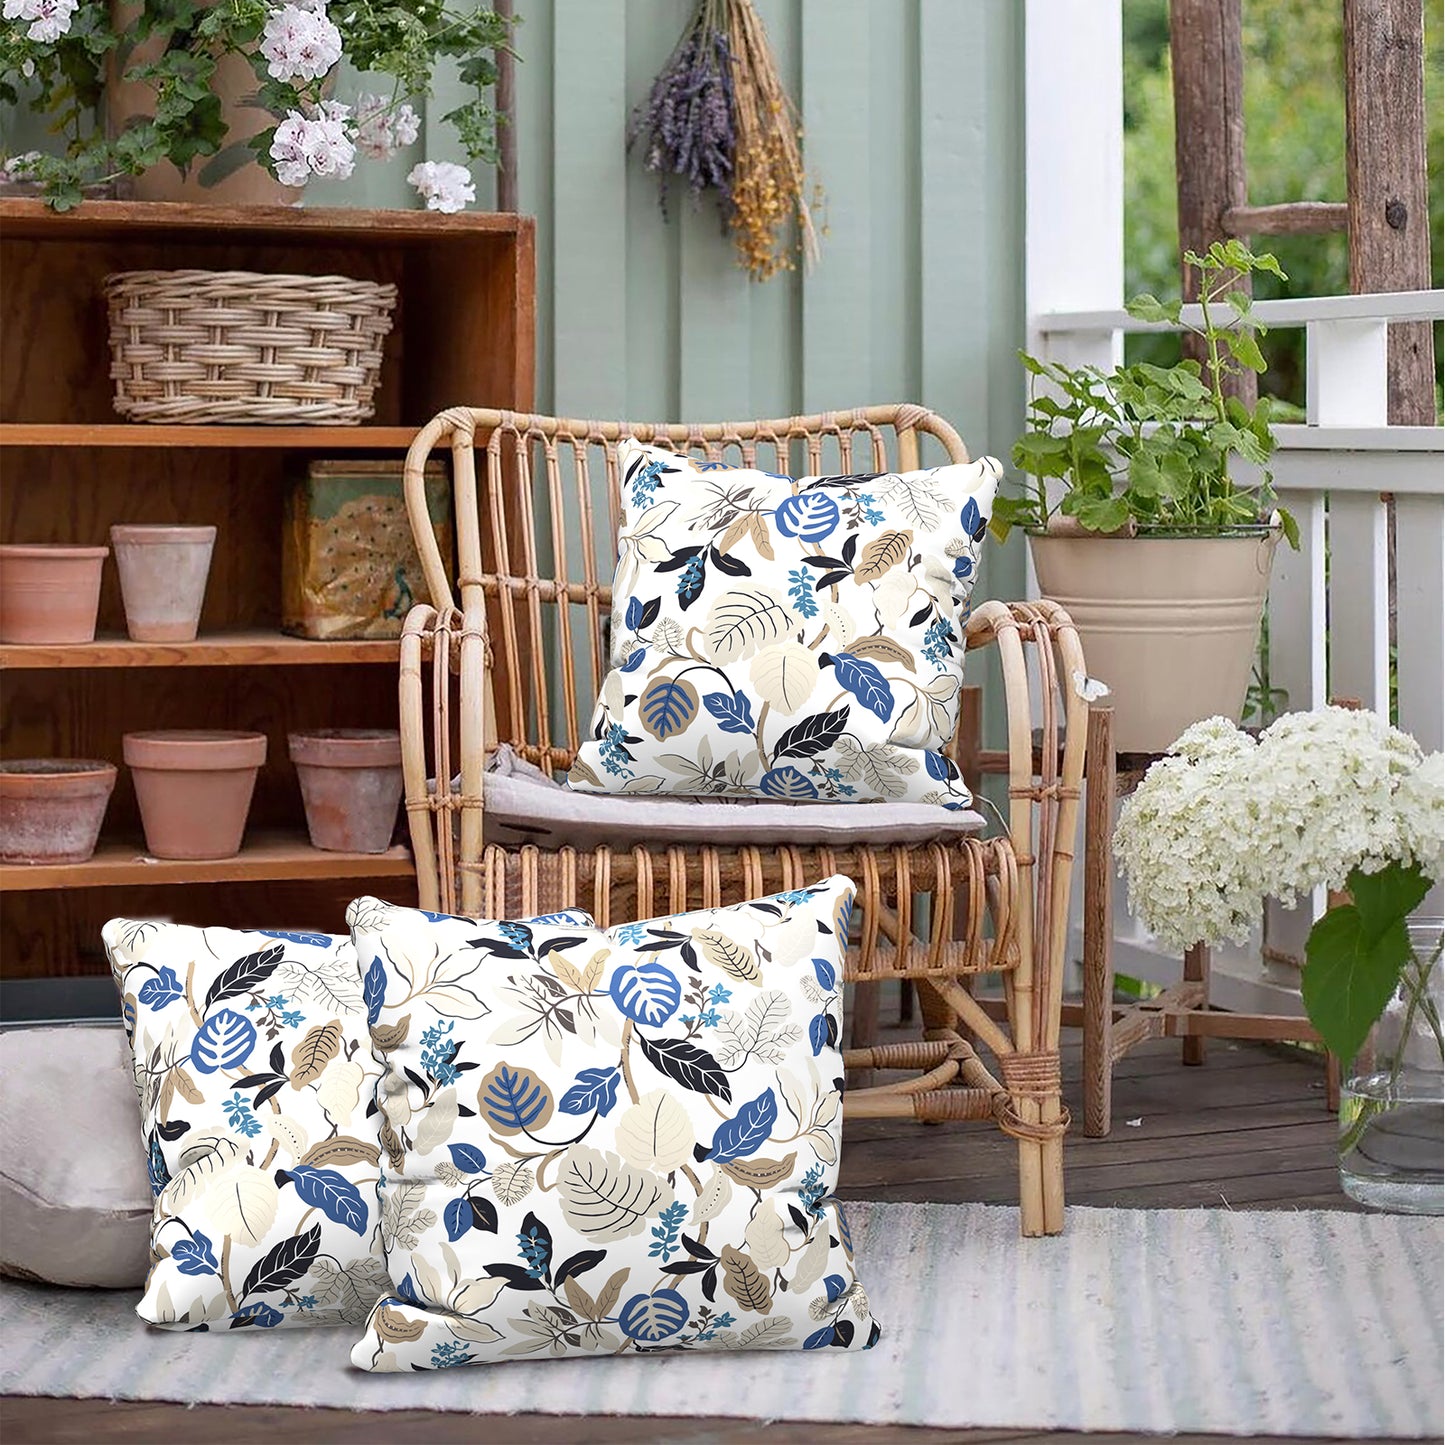 Melody Elephant Outdoor Throw Pillows with Inners, All Weather patio pillows set of 2, Square pillows Decorative for  home garden furniture, 20x20 Inch, Breeze Leaves Beige